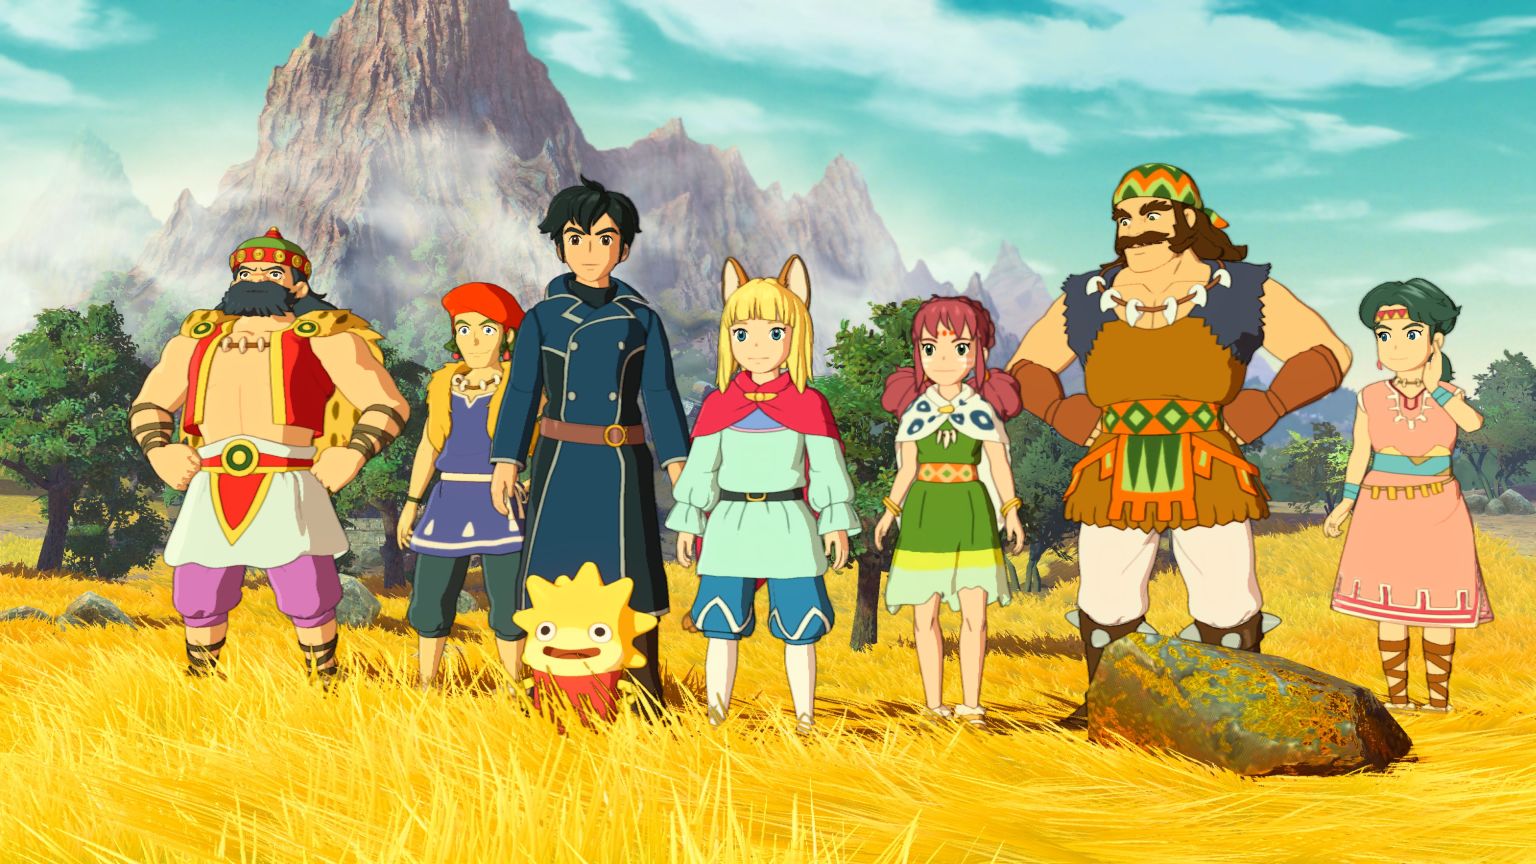 Your Ni No Kuni 2 crew from early in the game